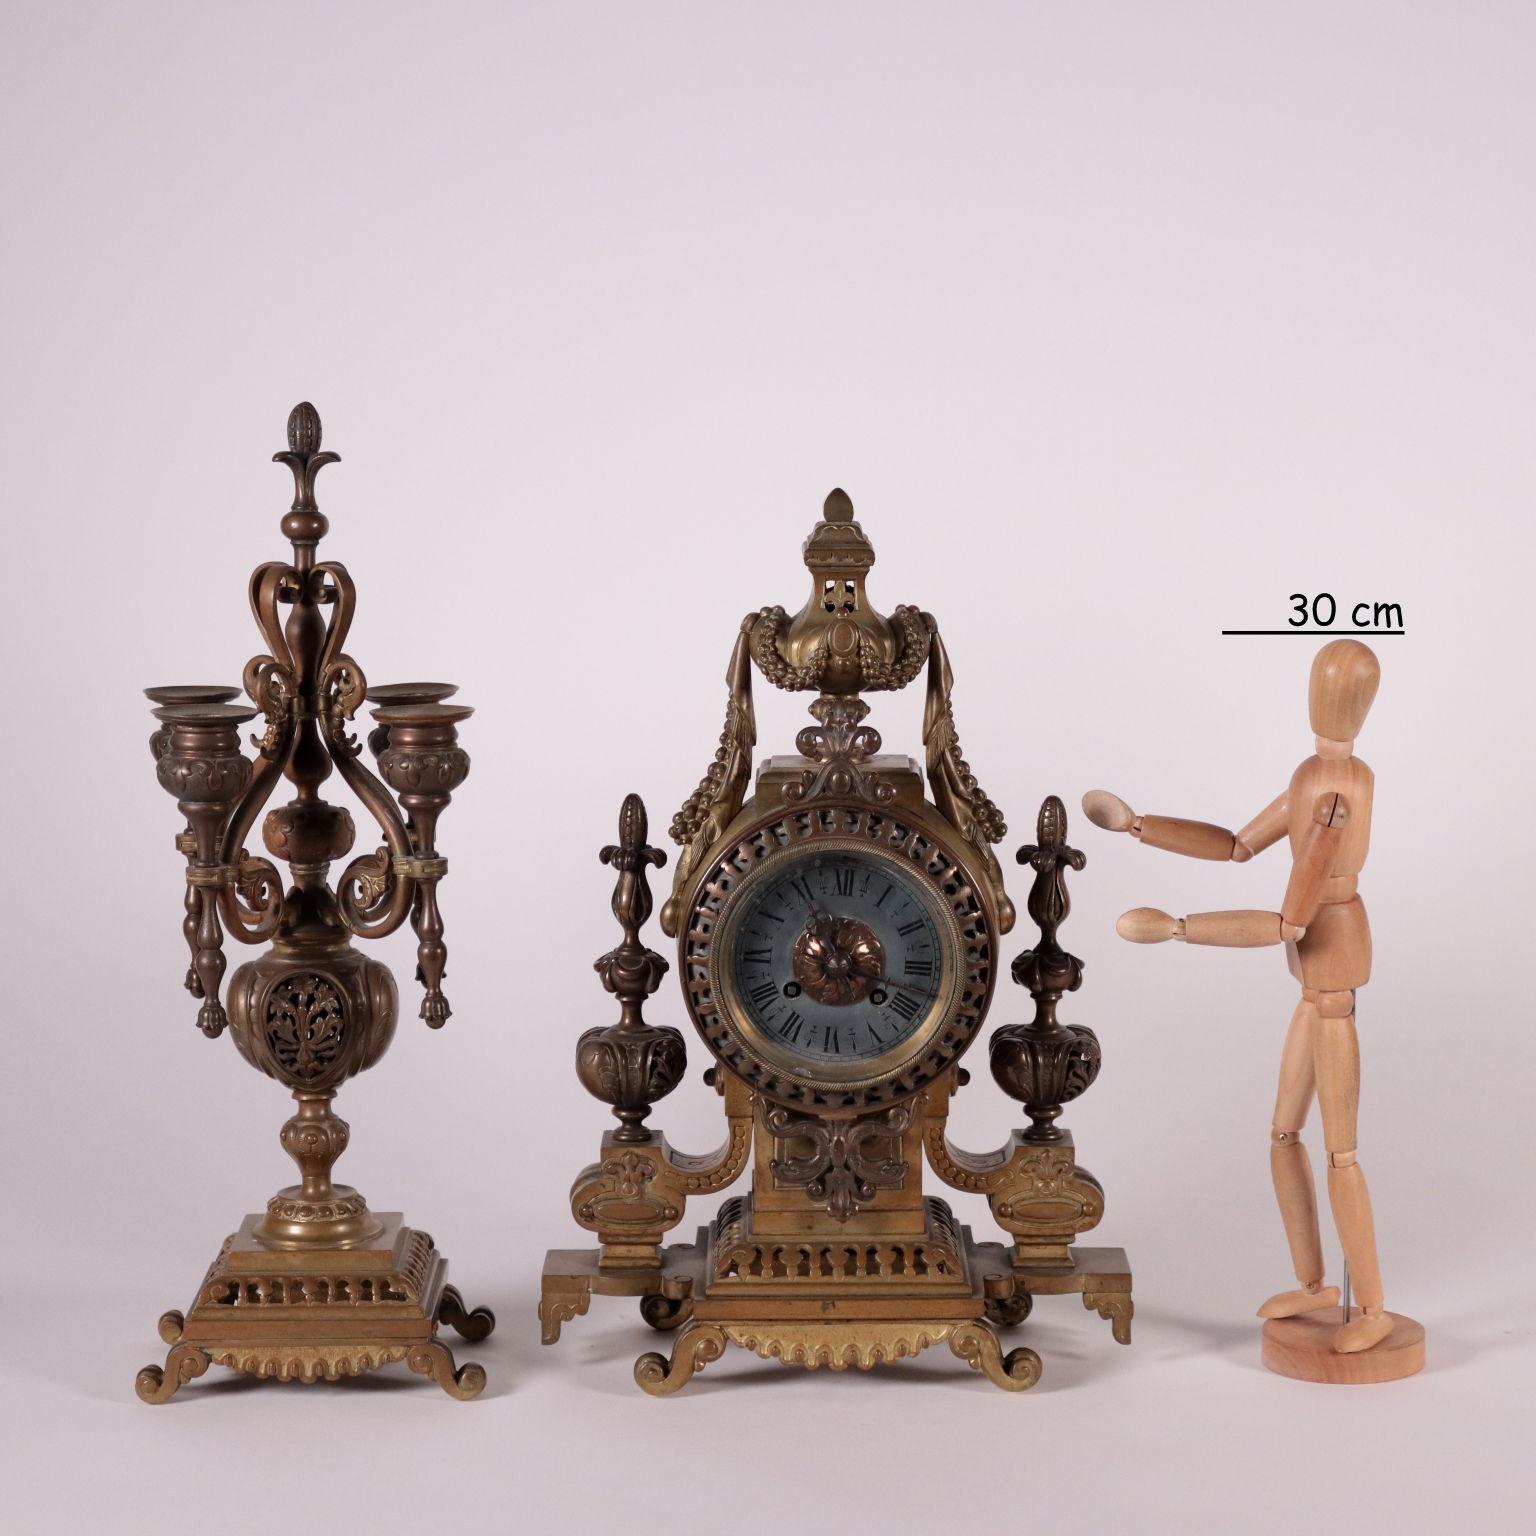 Table clock with bronze candlesticks. Pierced decorations, plant patterns, garlands and festoons. Metal vise with roman numbers for hours and iron hands. Branded Japy Freres medaille d'honneur & C.ie. The candlesticks have 4 flames and are 43 cm